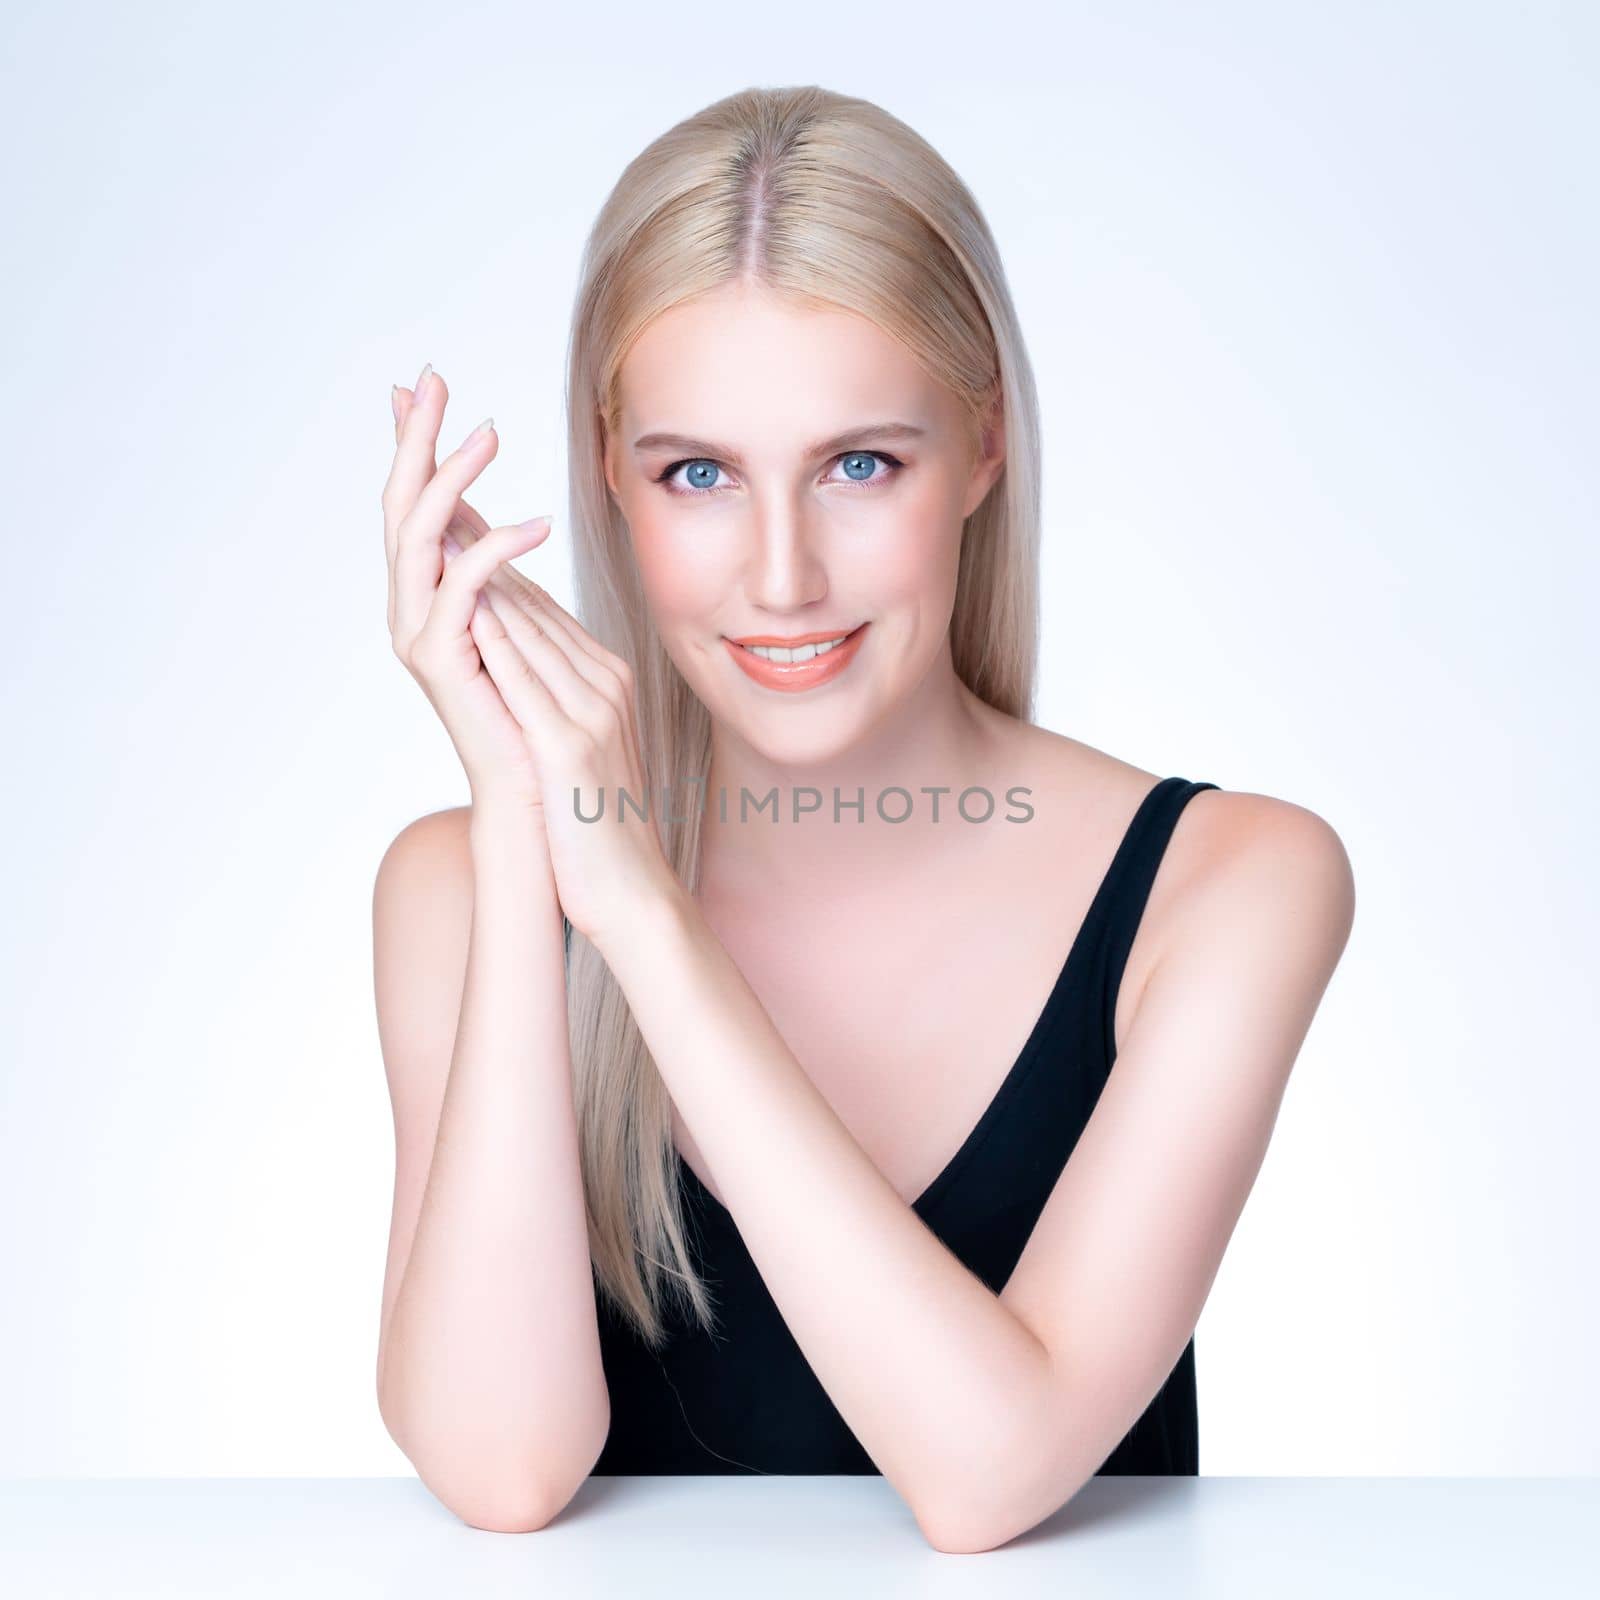 Pretty personable beautiful woman portrait with perfect smooth clean skin and natural makeup portrait in isolated background. Hand gesture with expressive facial expression for beauty model concept.